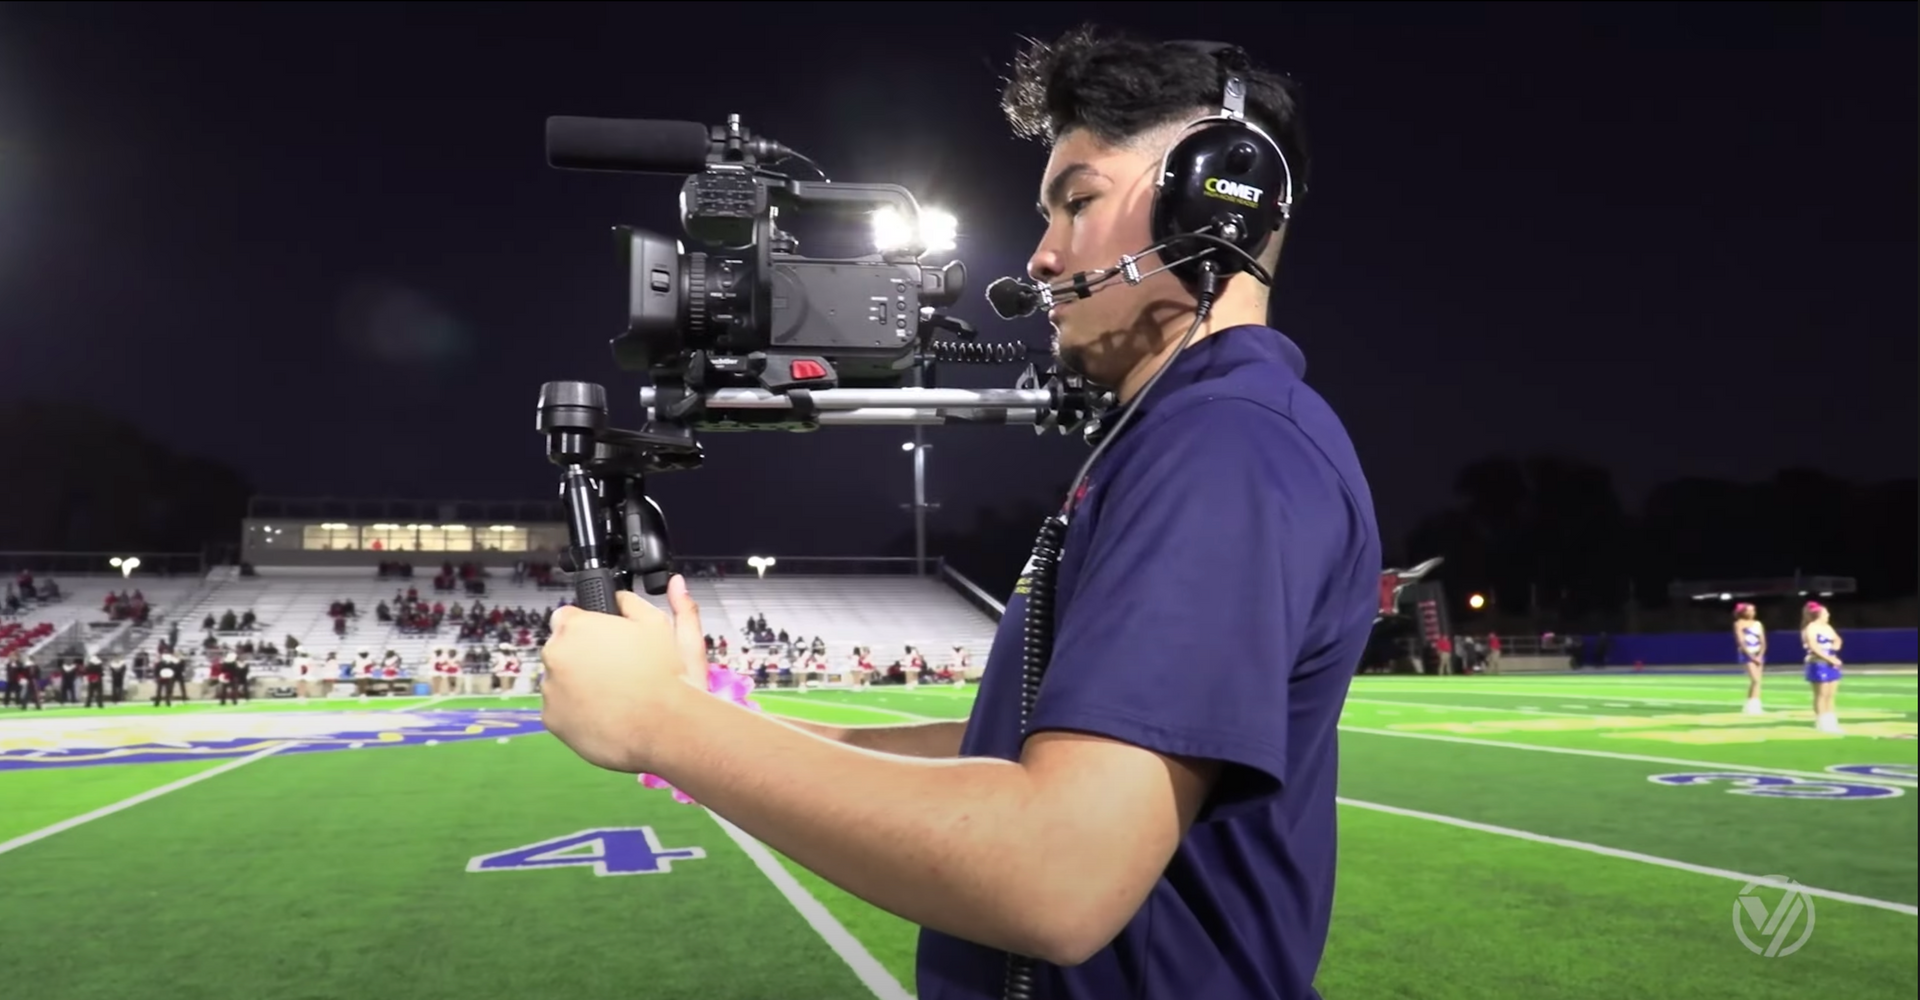 student operating camera during game